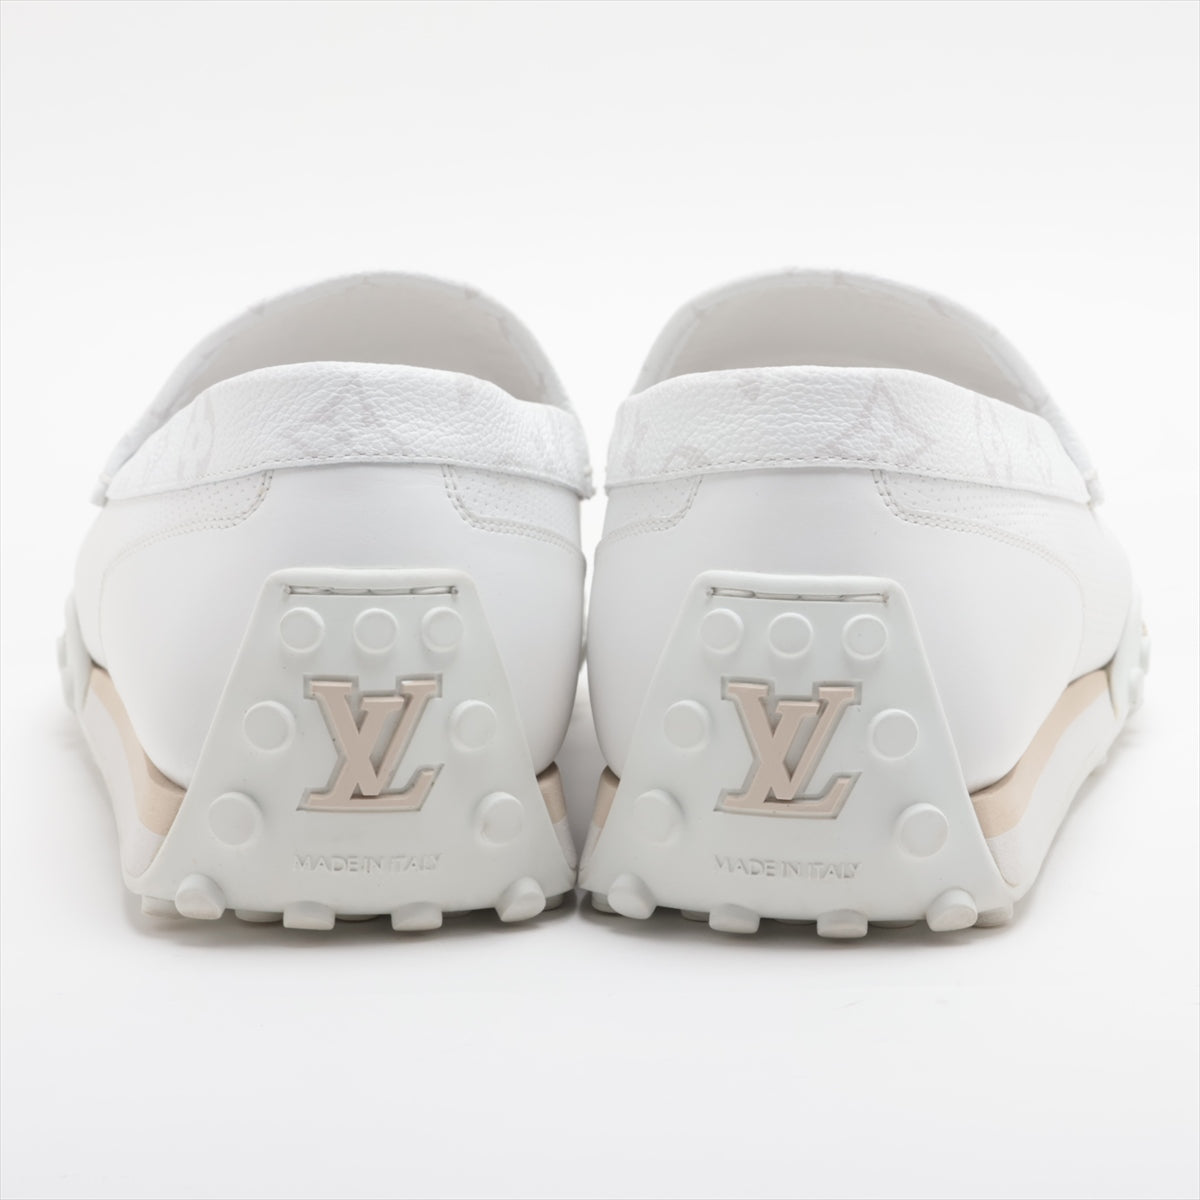 Louis Vuitton LV Racer Line 22 years PVC & leather Driving shoes UK10 Men's White ND0222 Monogram LV Logo box There is a bag